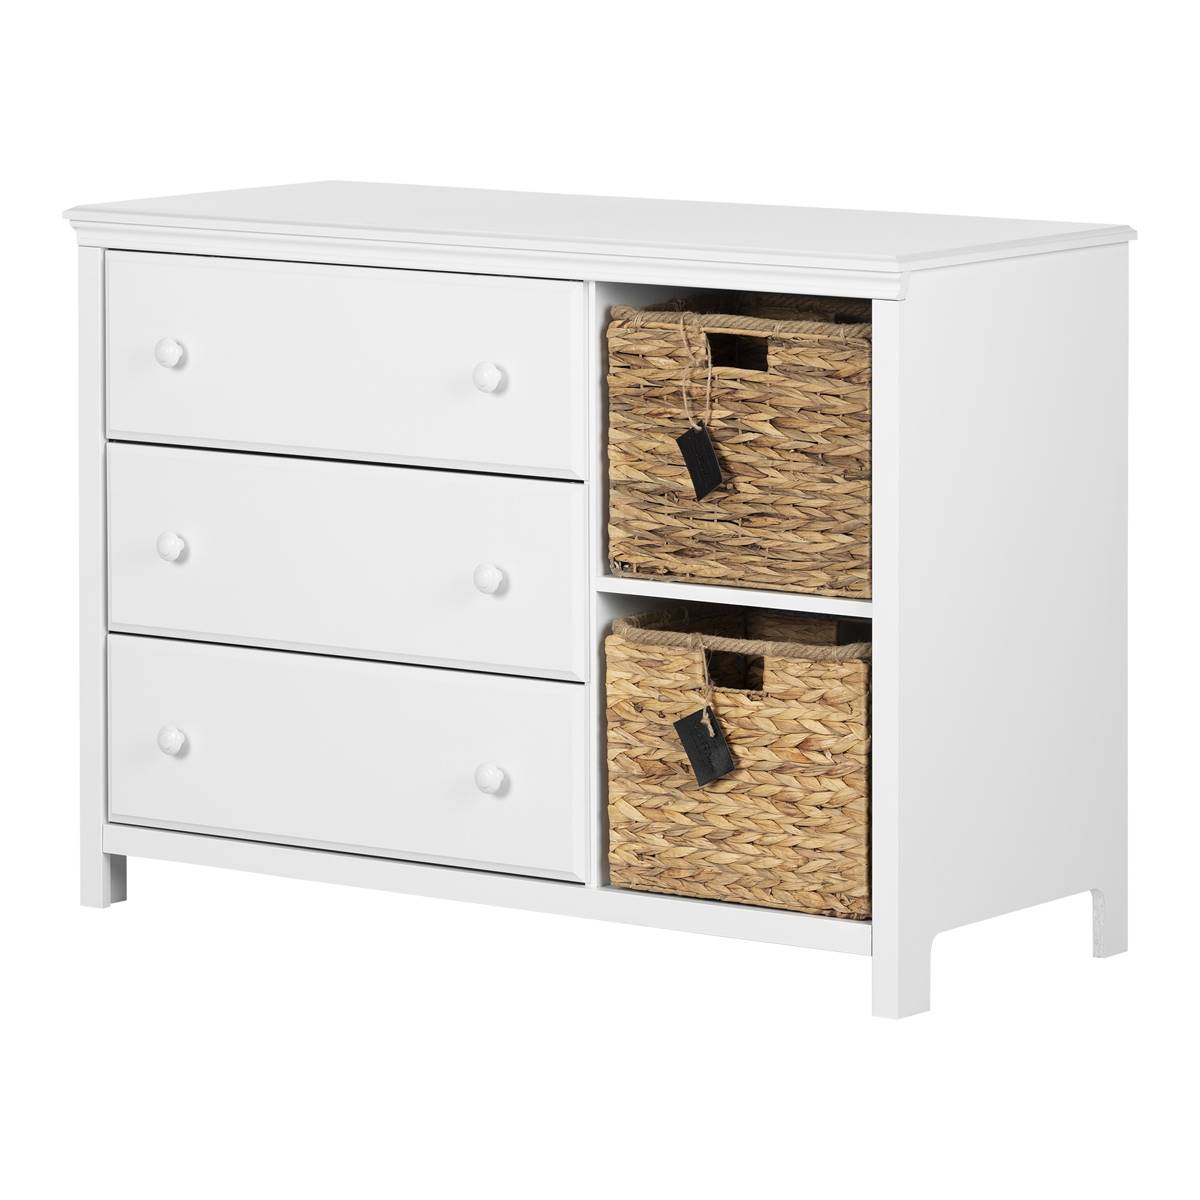 South Shore Cotton Candy Pure White 3-Drawer Dresser W/Baskets